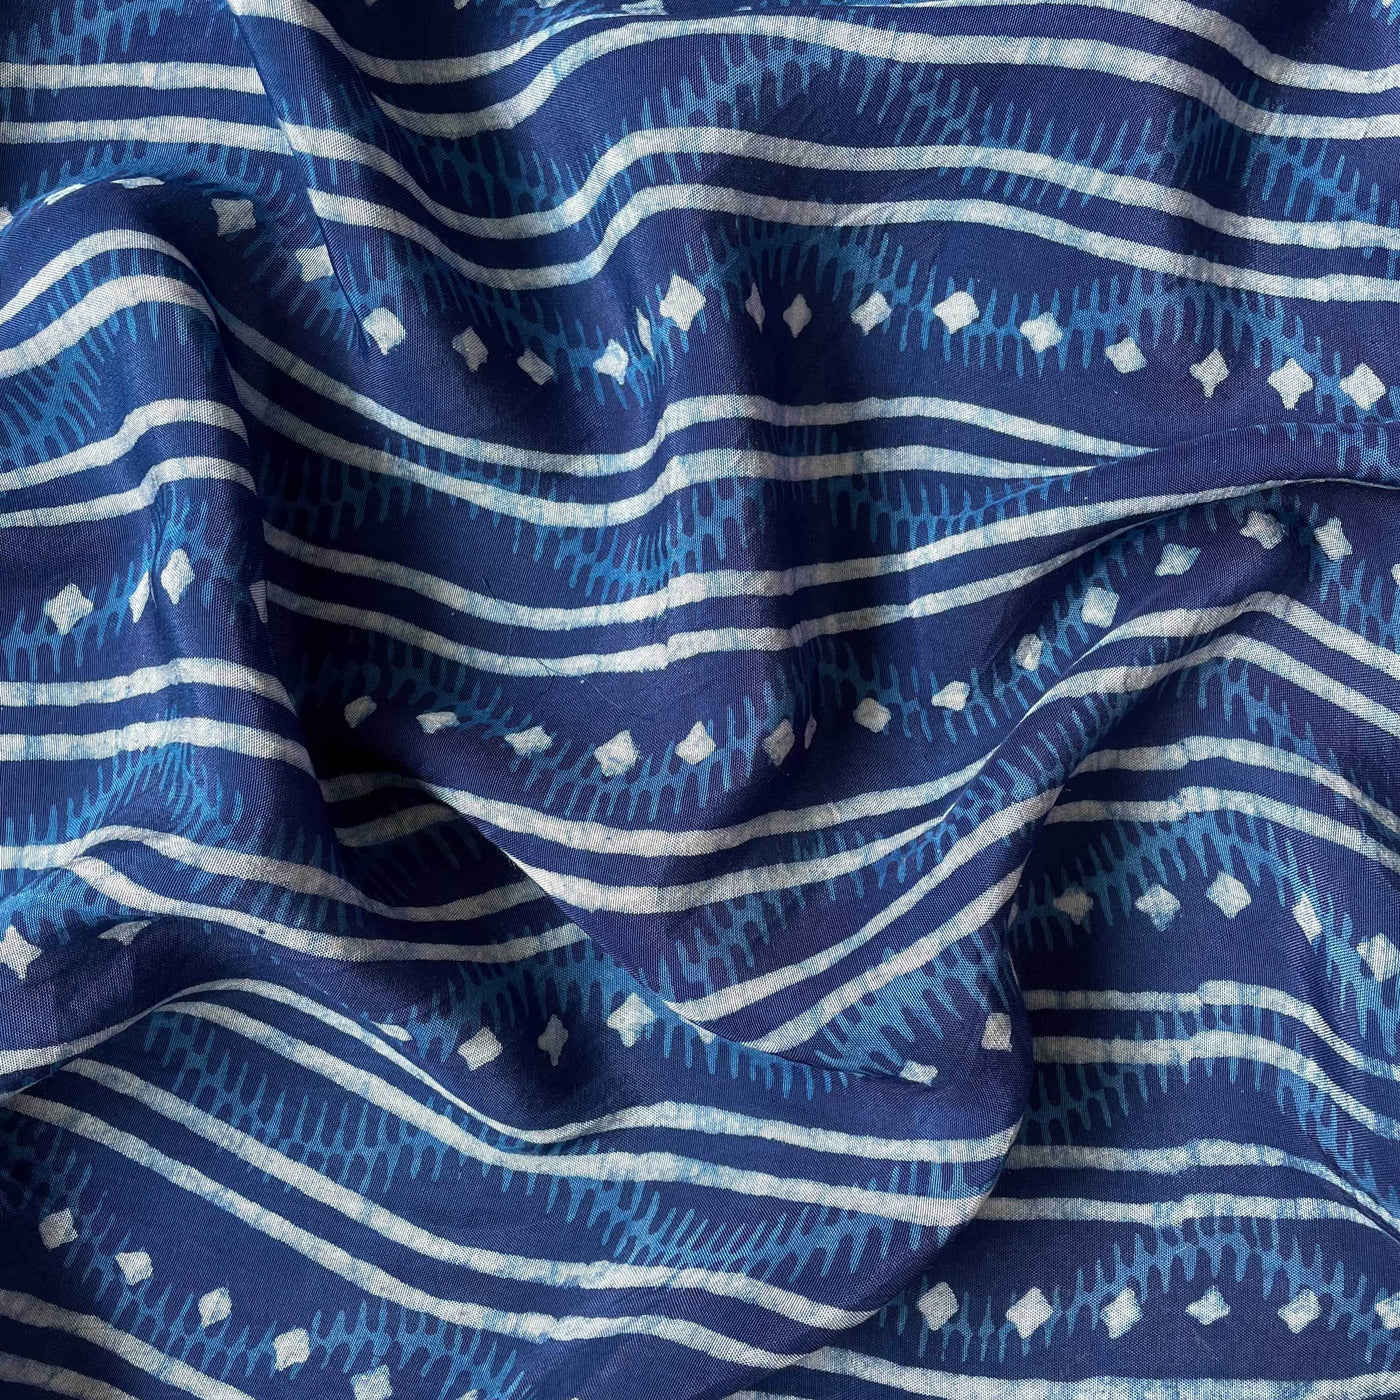 Hand Block Printed Cotton Fabric Fabric Indigo Dabu Natural Dyed Tribal Stripes Hand Block Printed Pure Crepe Fabric (Width 45 Inches)